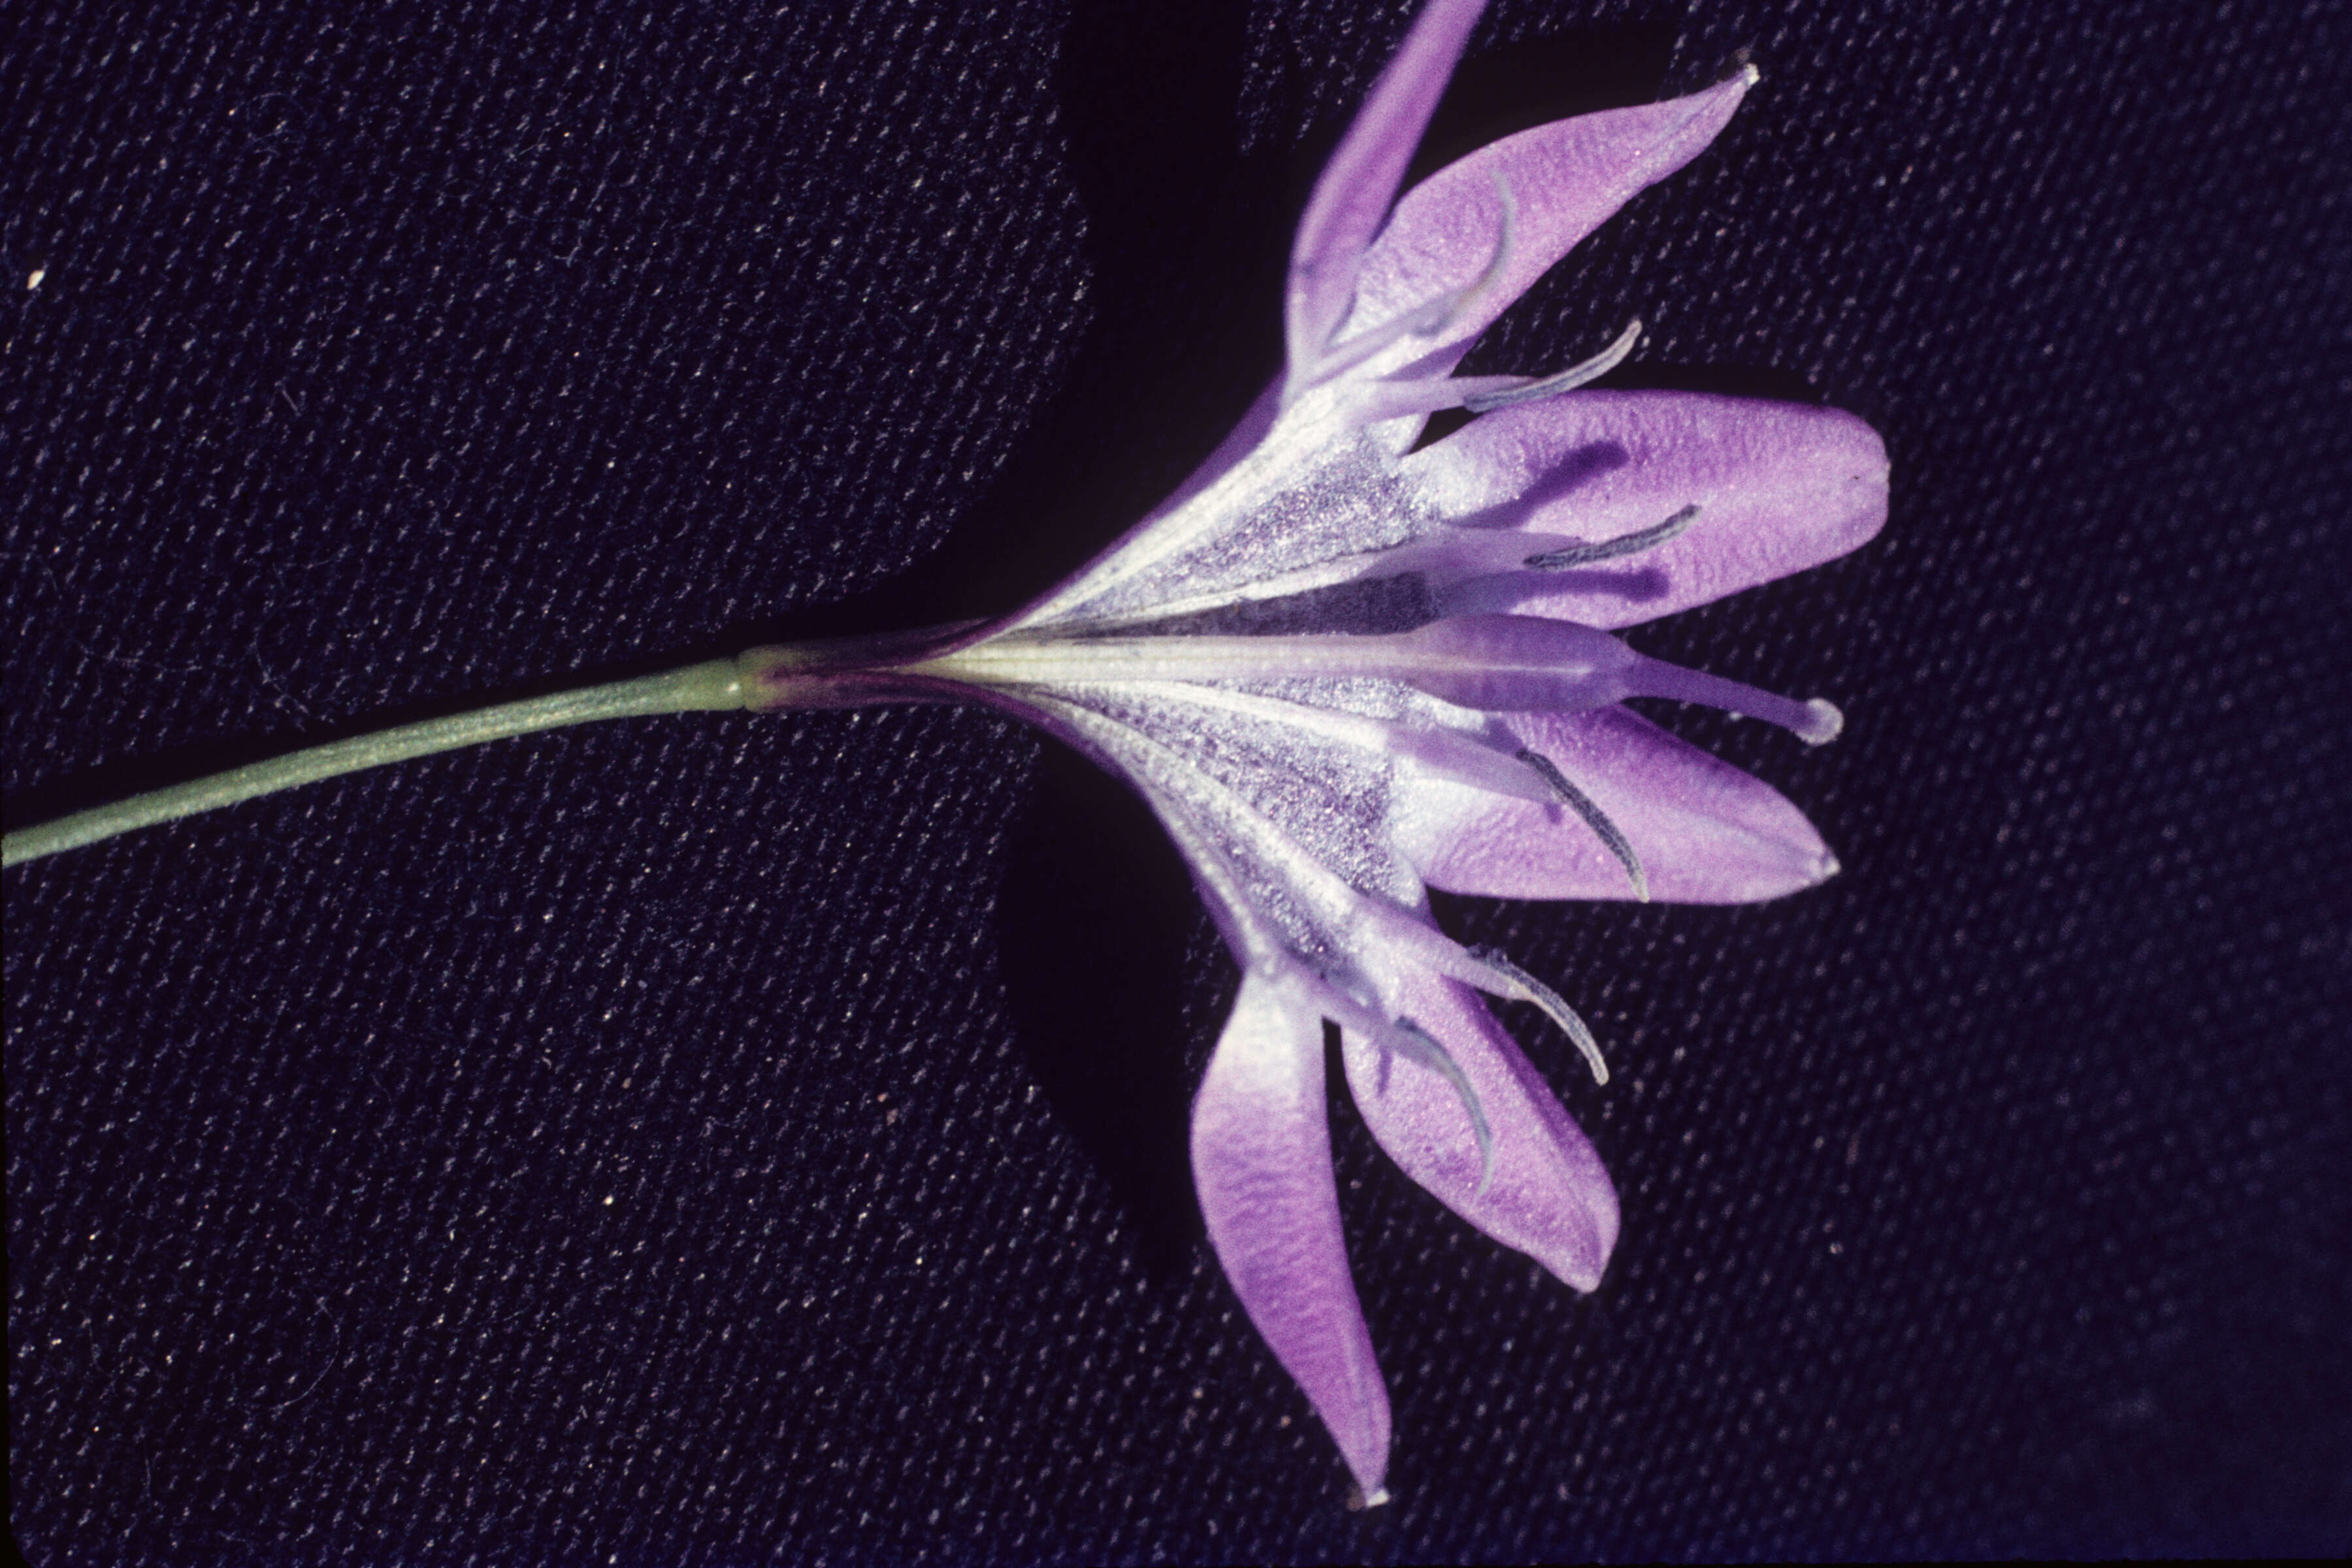 Image of Triplet lily